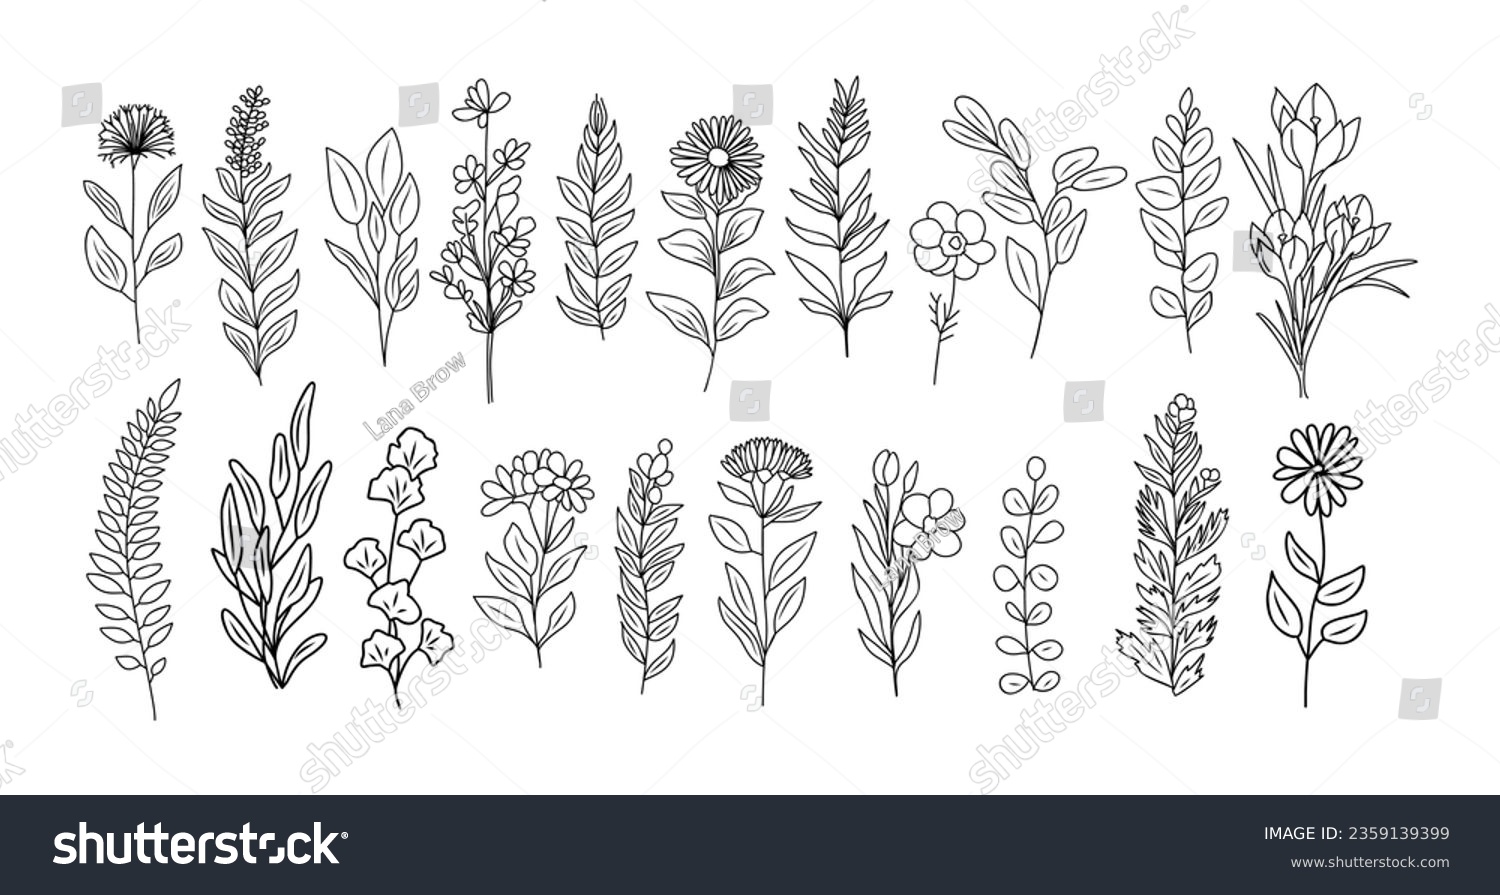 SVG of Set of tiny wild flowers and plants line art botanical illustrations. Trendy greenery hand drawn black ink sketches collection. Vector design elements isolated on white background svg